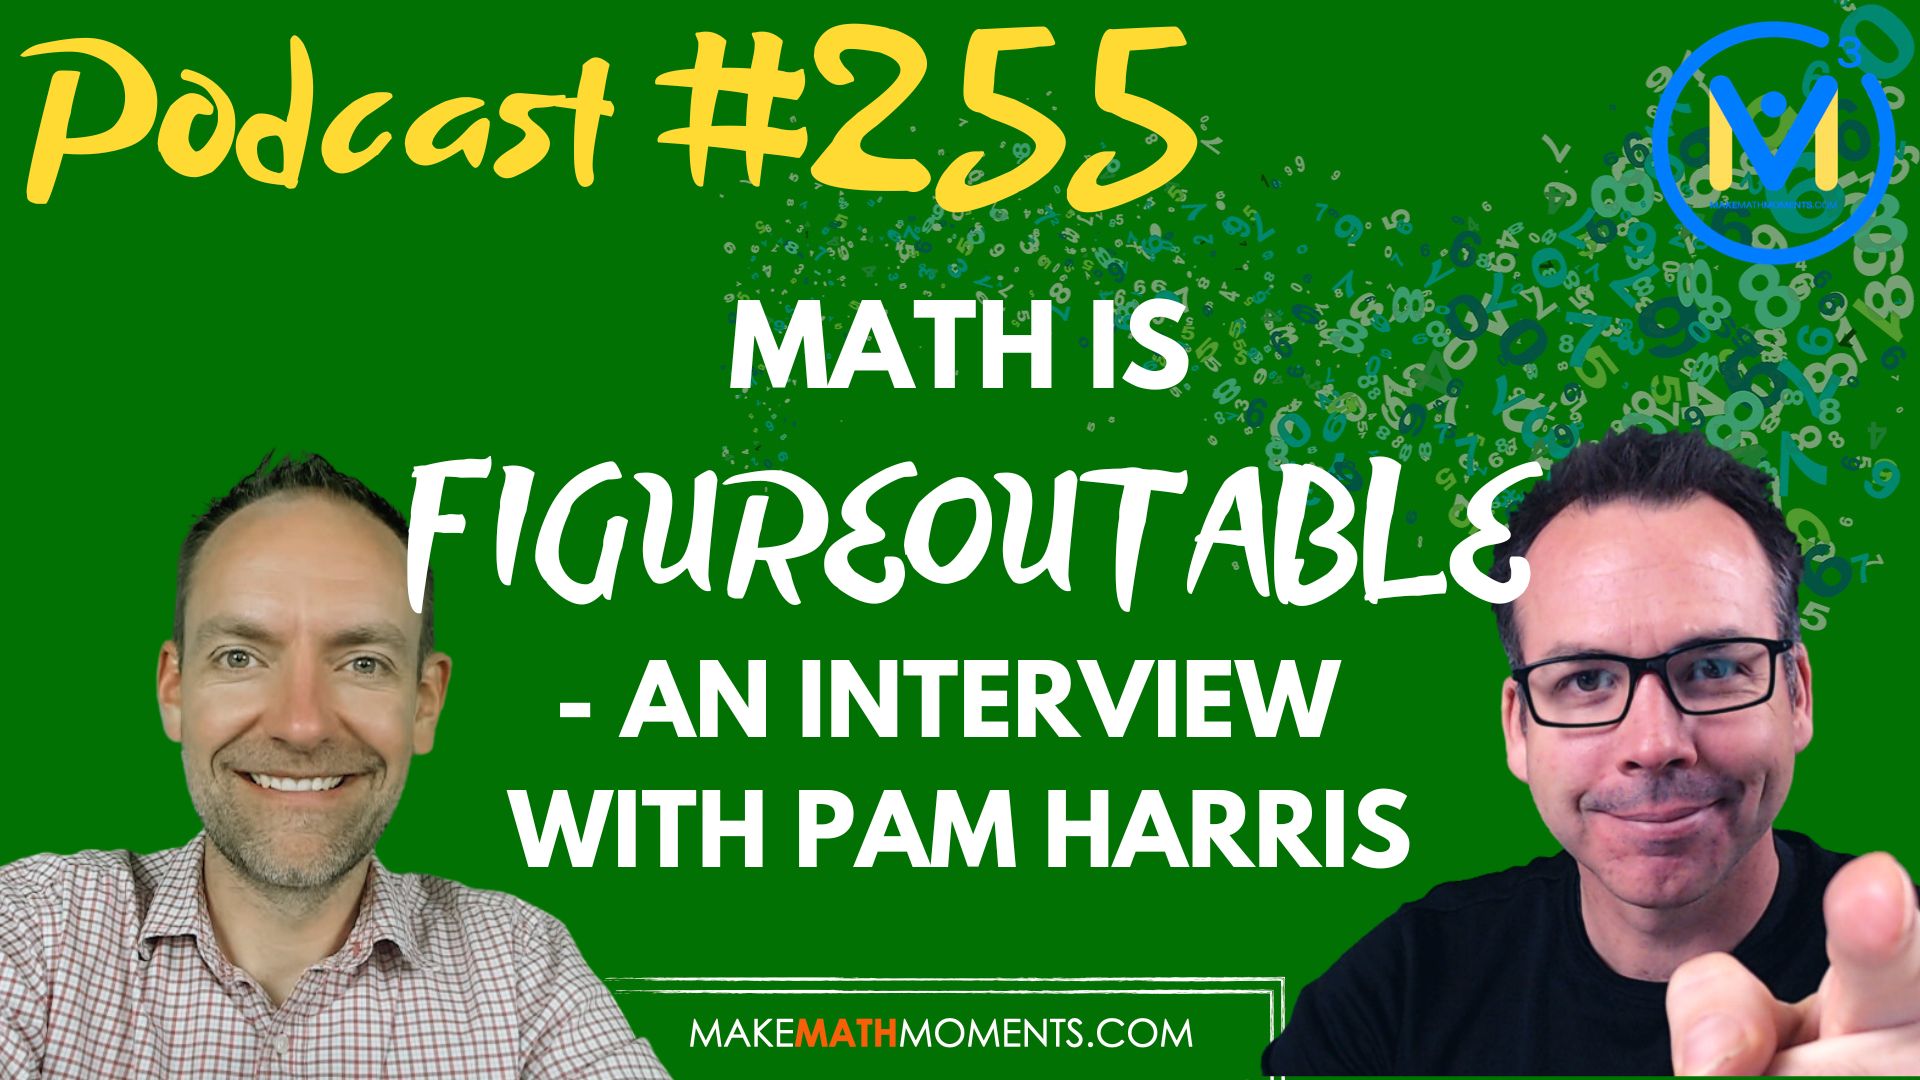 Episode #255: Math Is Figureoutable – An Interview With Pam Harris